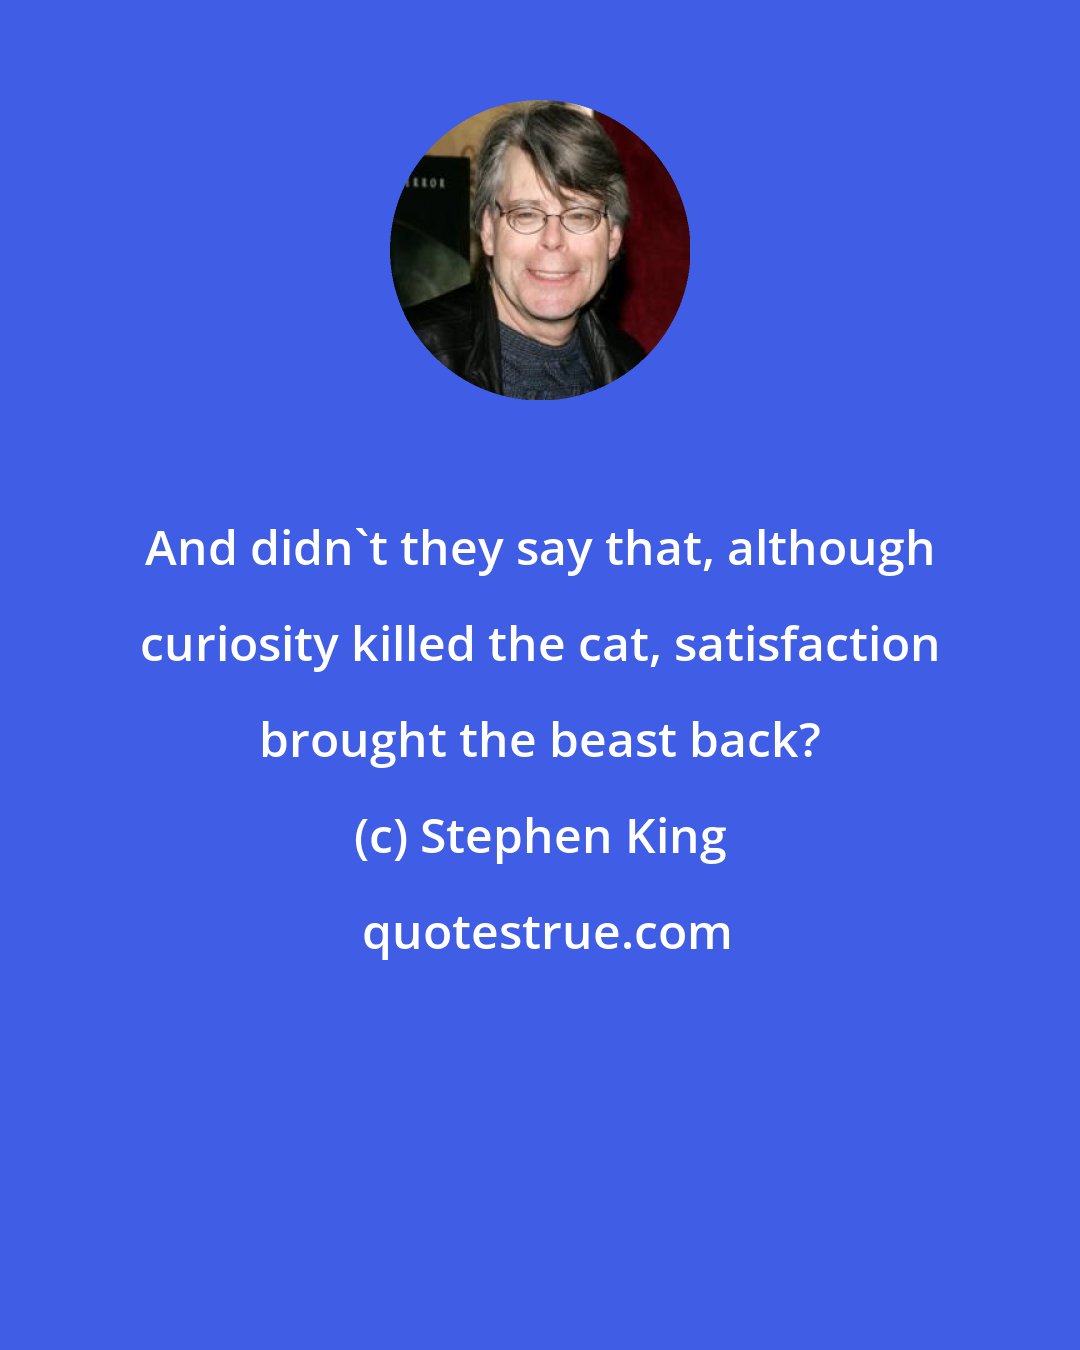 Stephen King: And didn't they say that, although curiosity killed the cat, satisfaction brought the beast back?